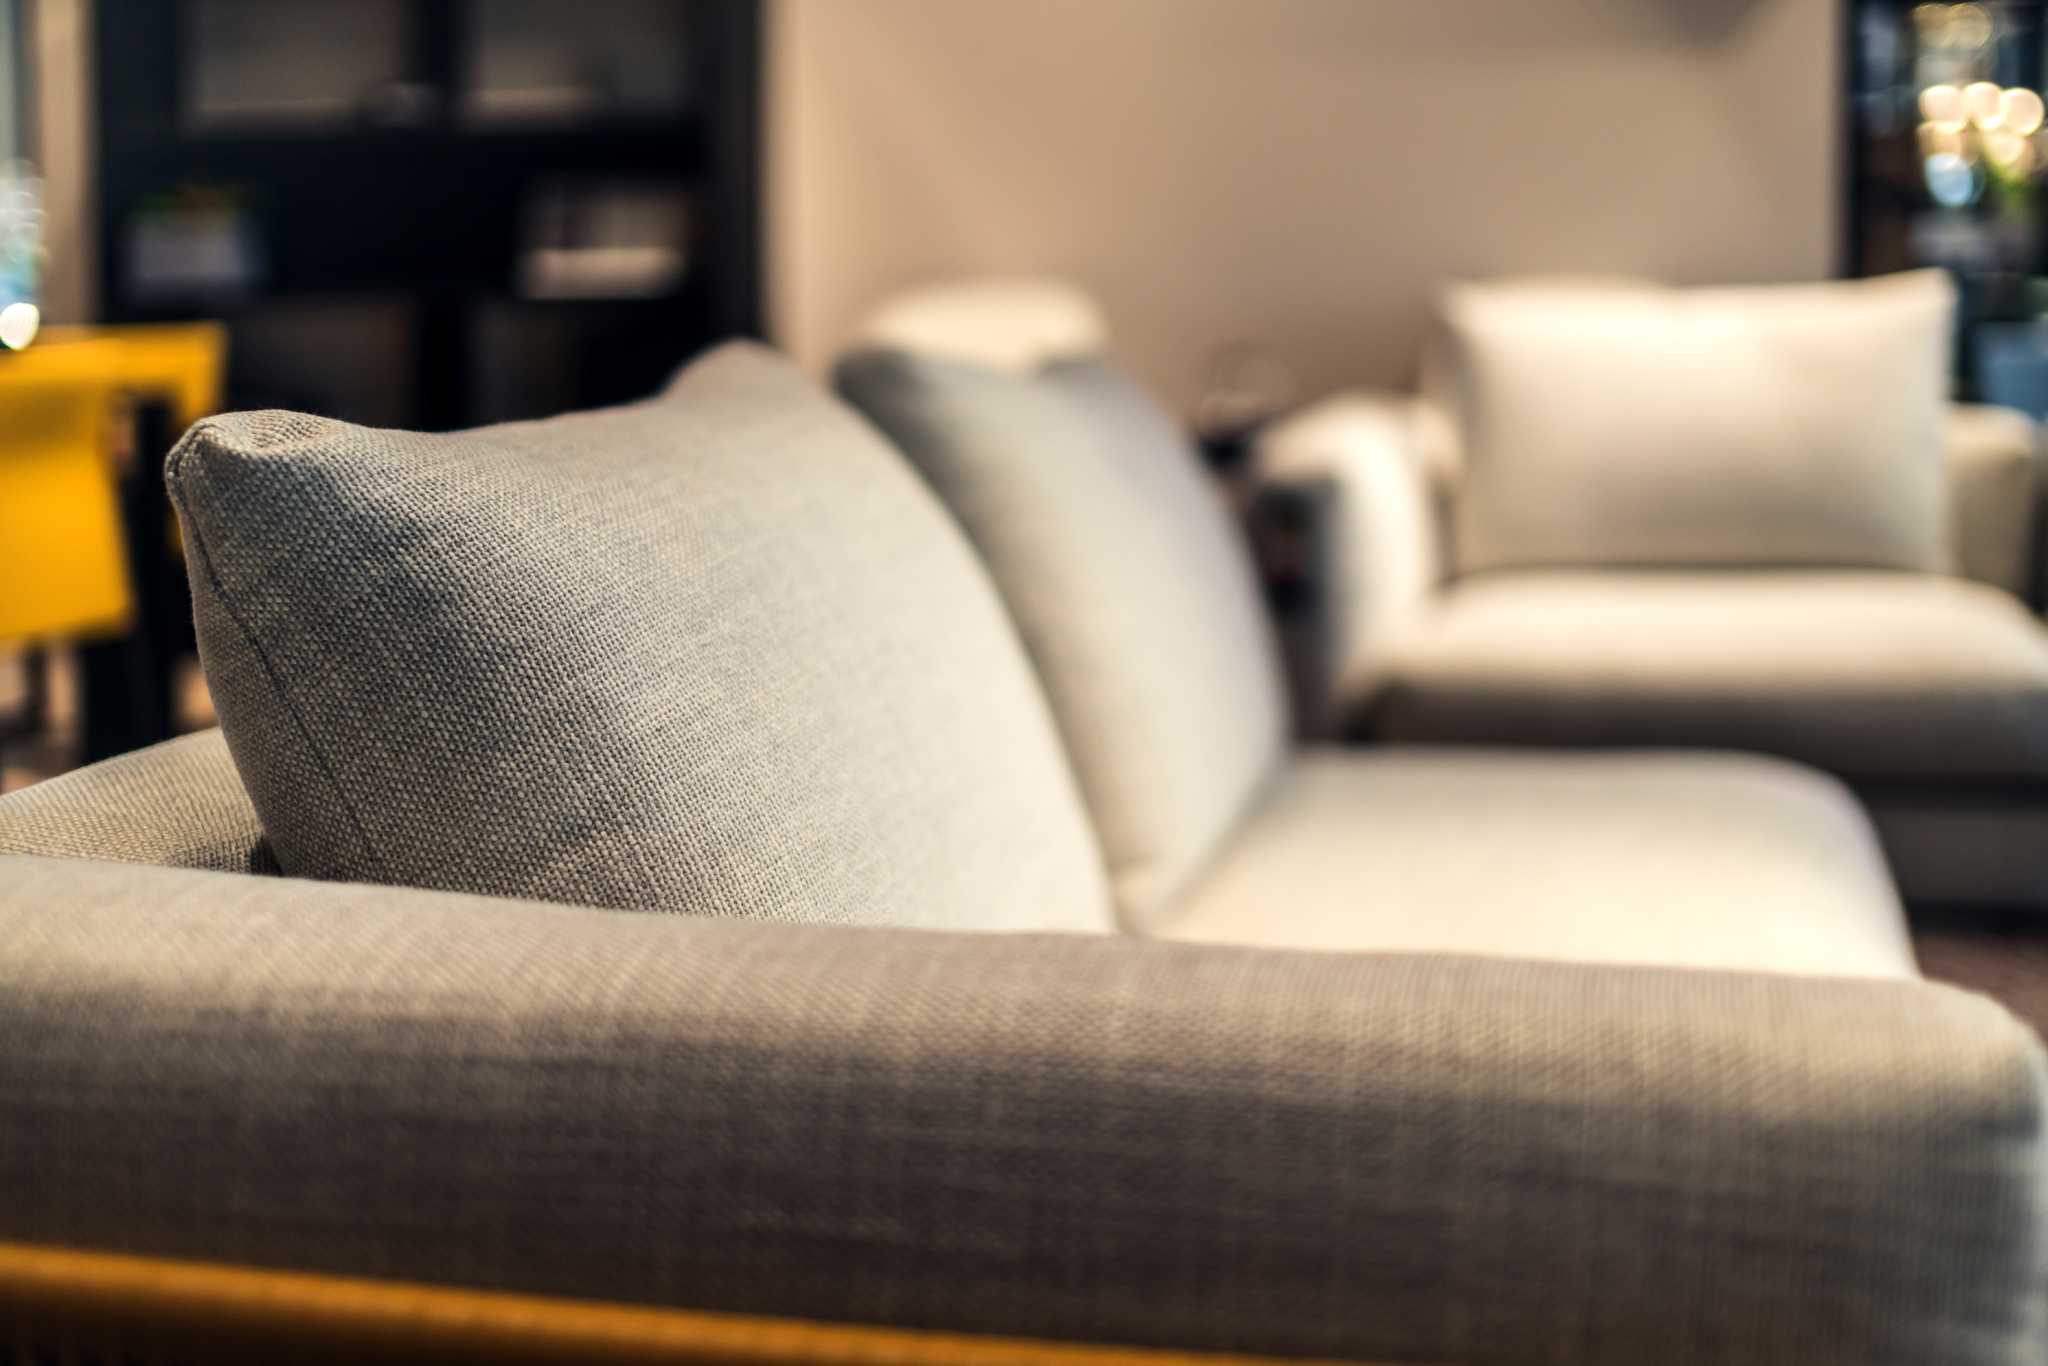 Sofa cushion fillings - a comfort-seekers guide from Sofas & Stuff